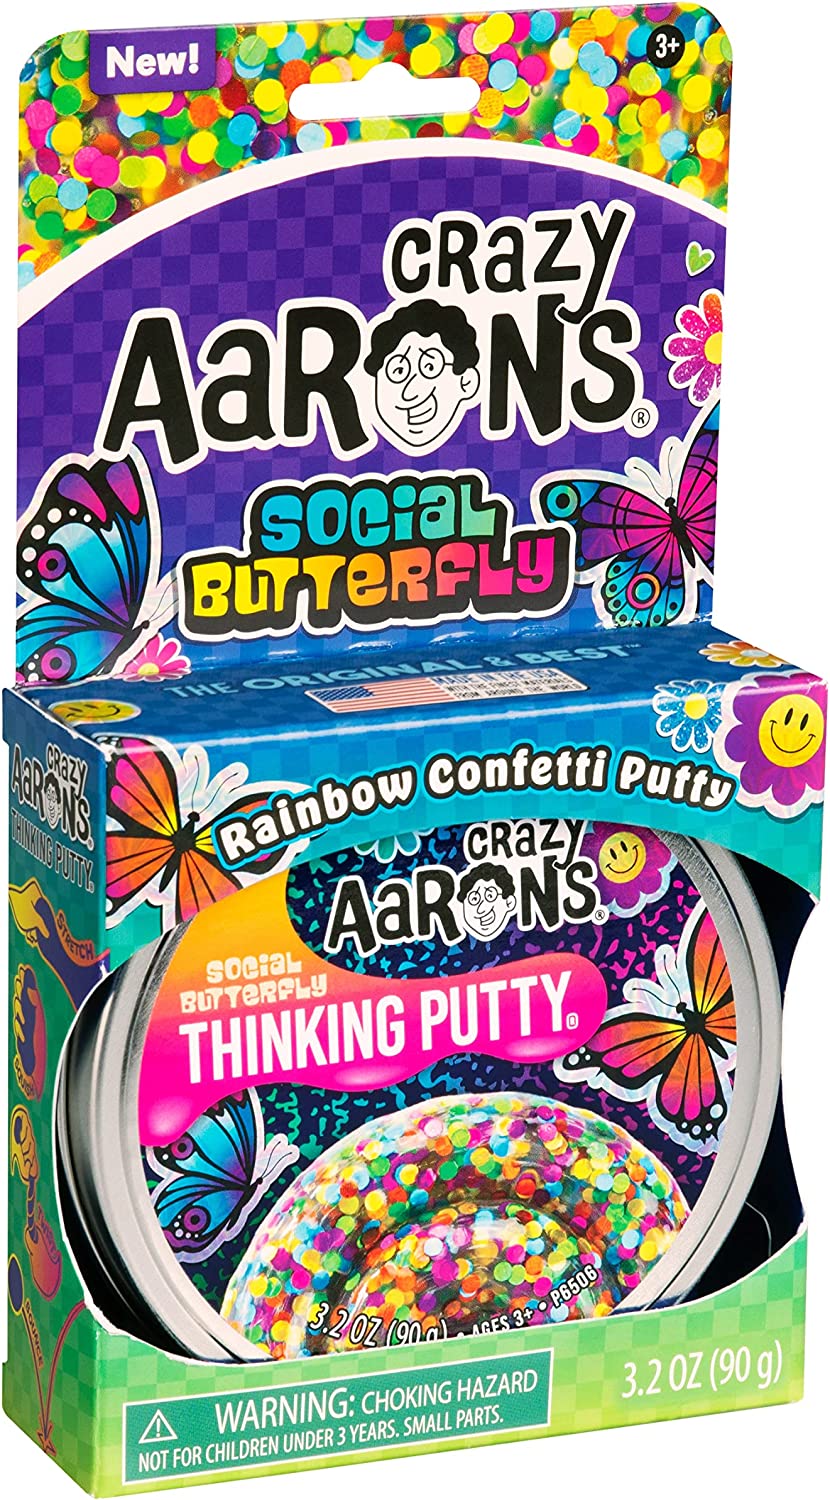 SOCIAL BUTTERFLY 4" THINKING PUTTY